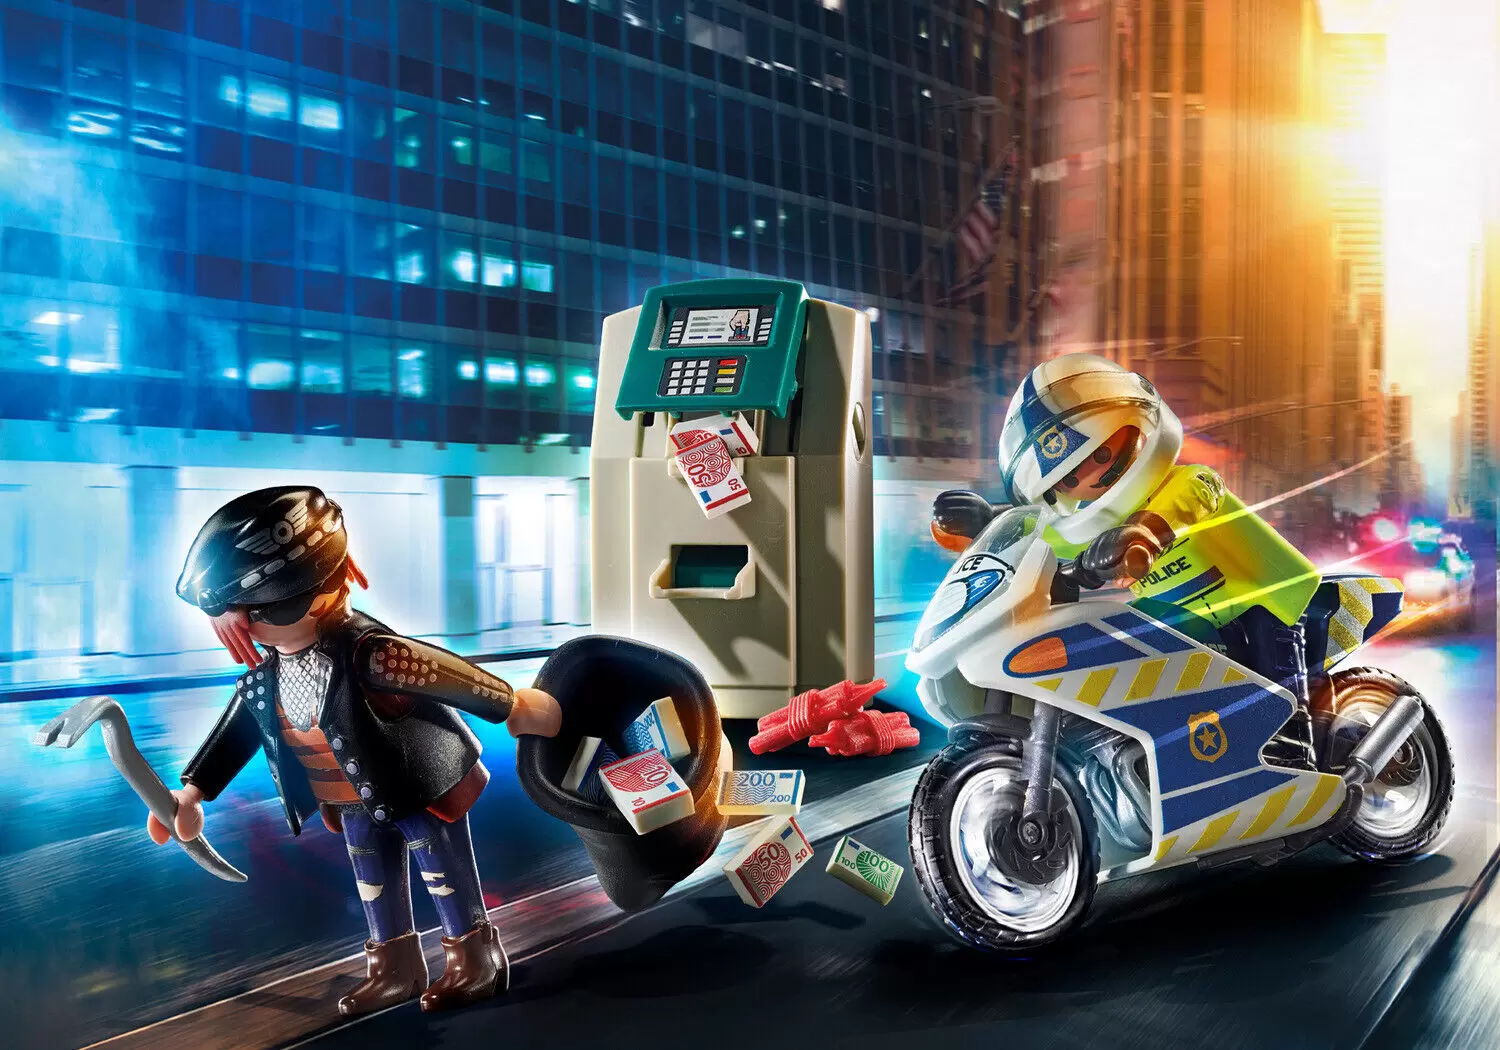 Police Playmobil - Police motorcycle after a thief